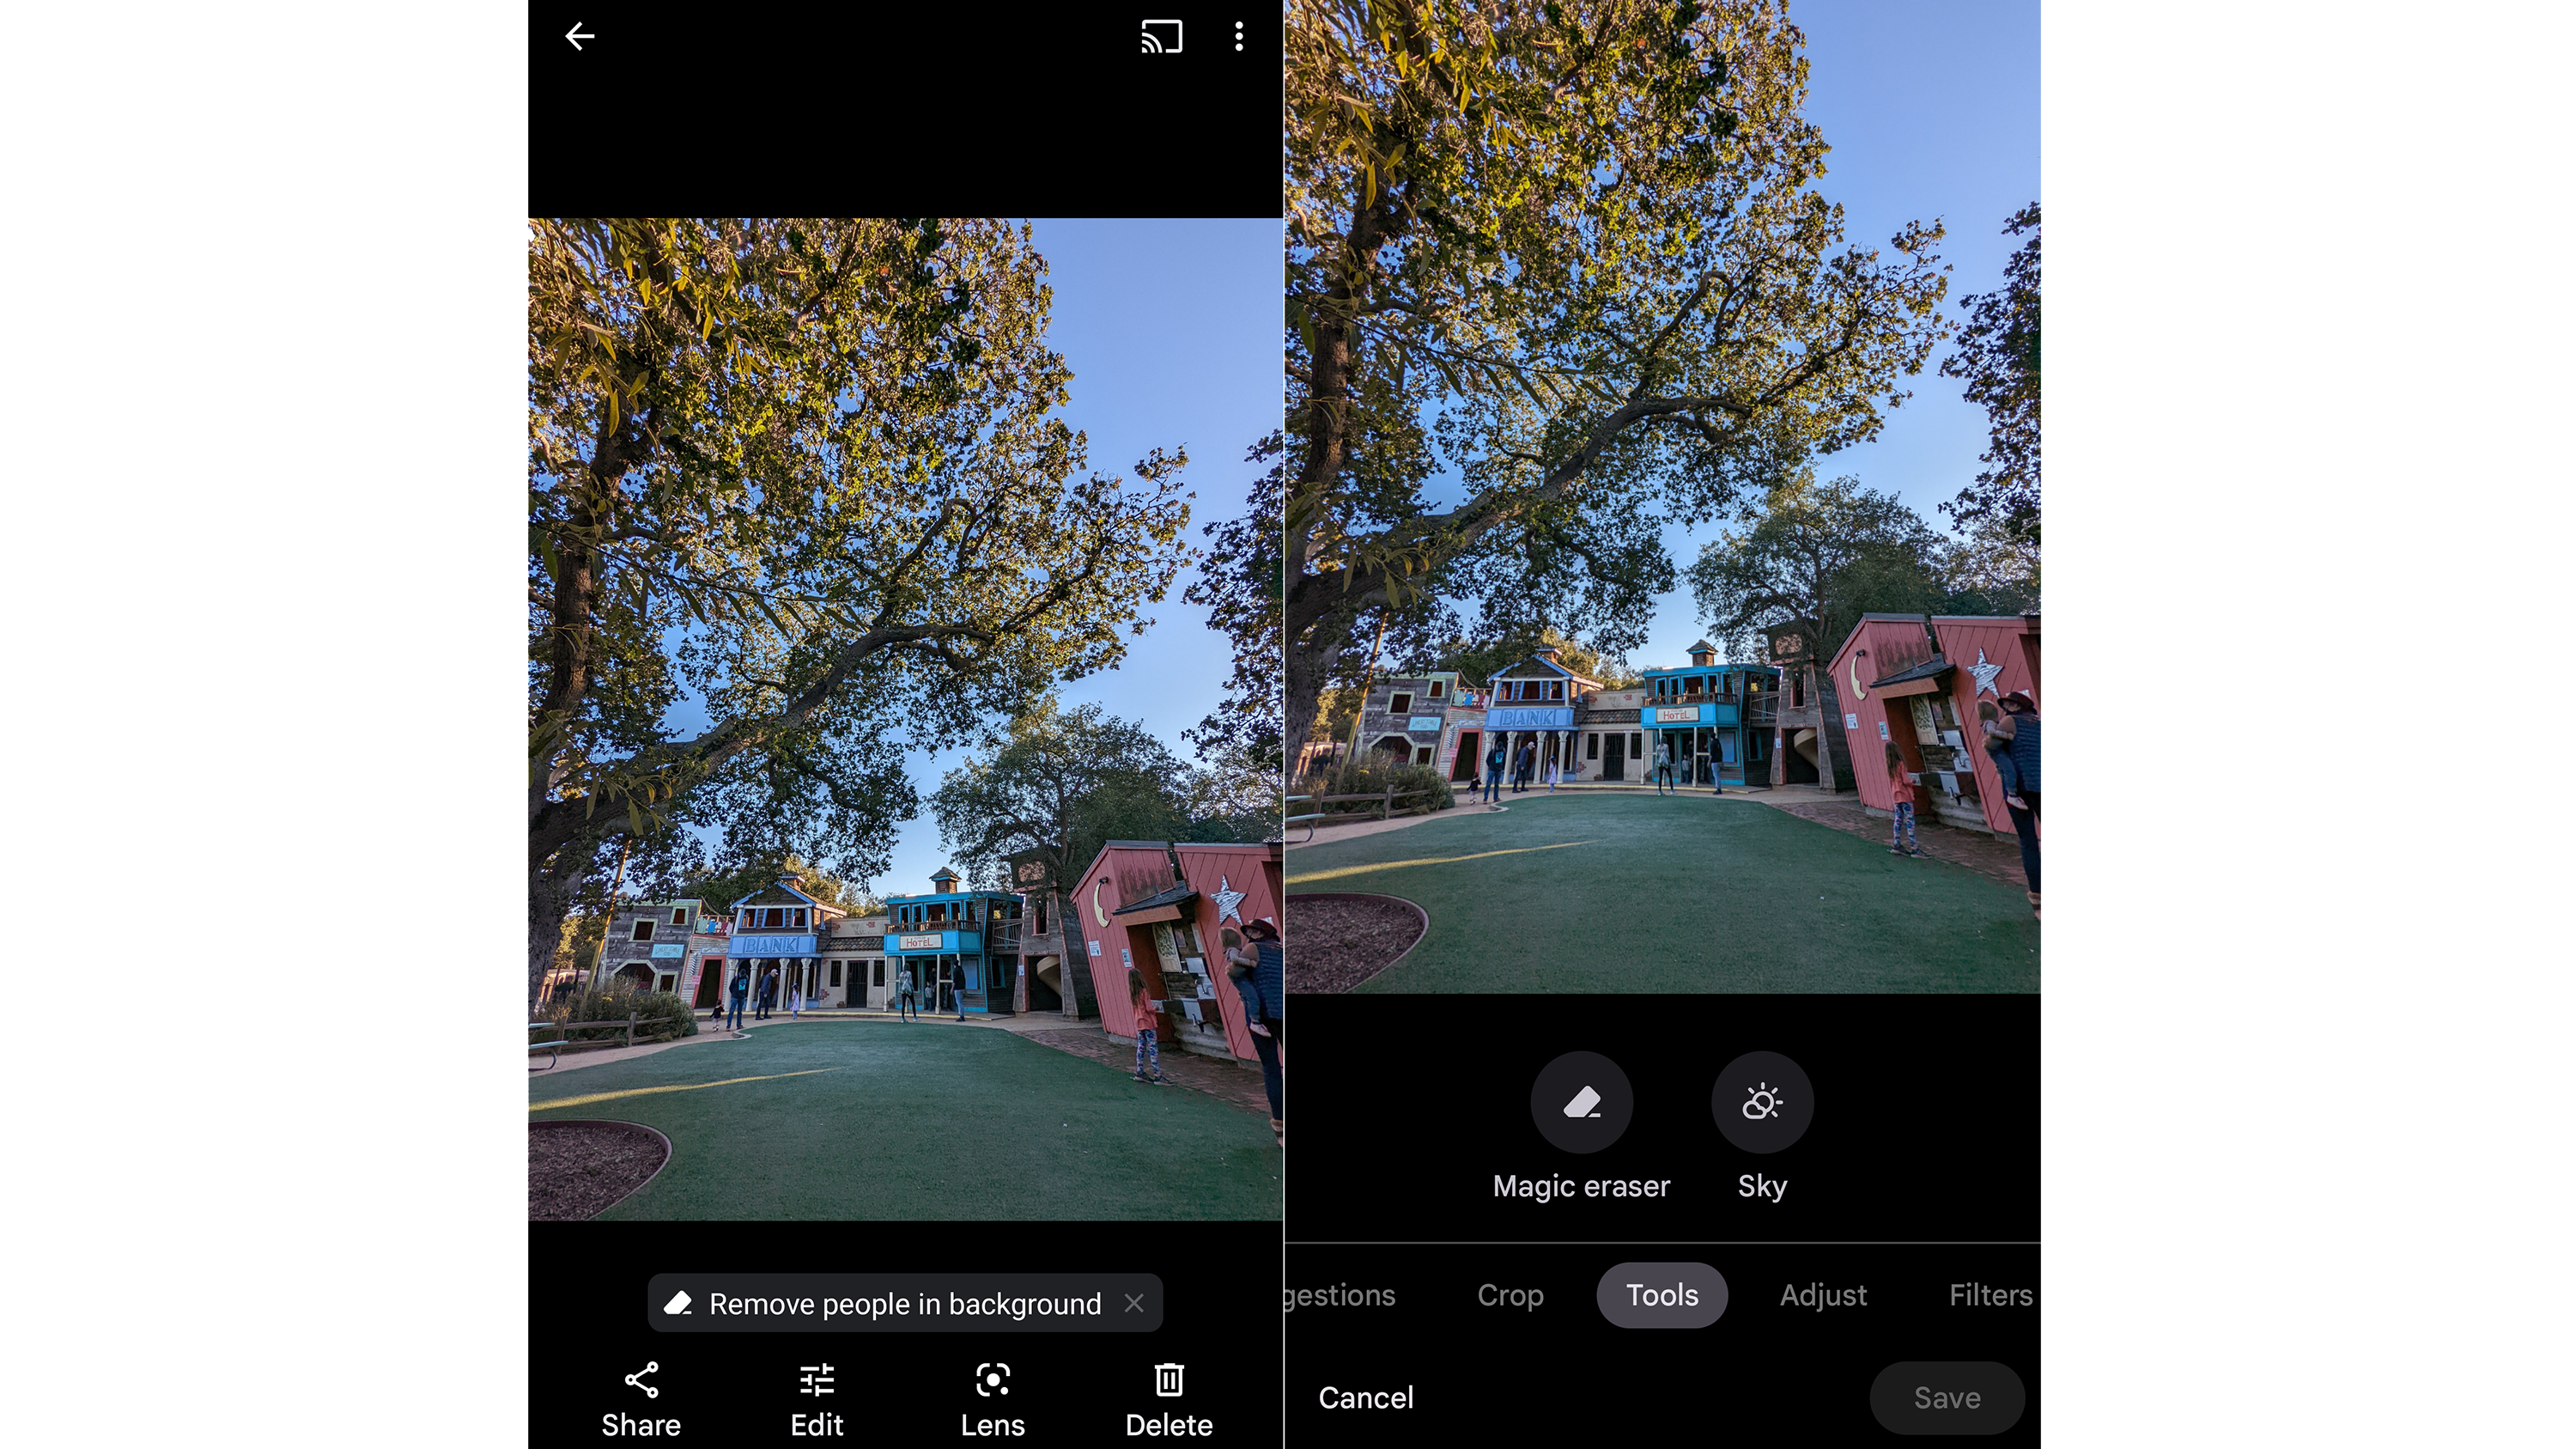 In some cases, Google Photos knows you already want to remove people from the background before you even select the Magic Eraser tool. (Image: Florence Ion / Gizmodo)